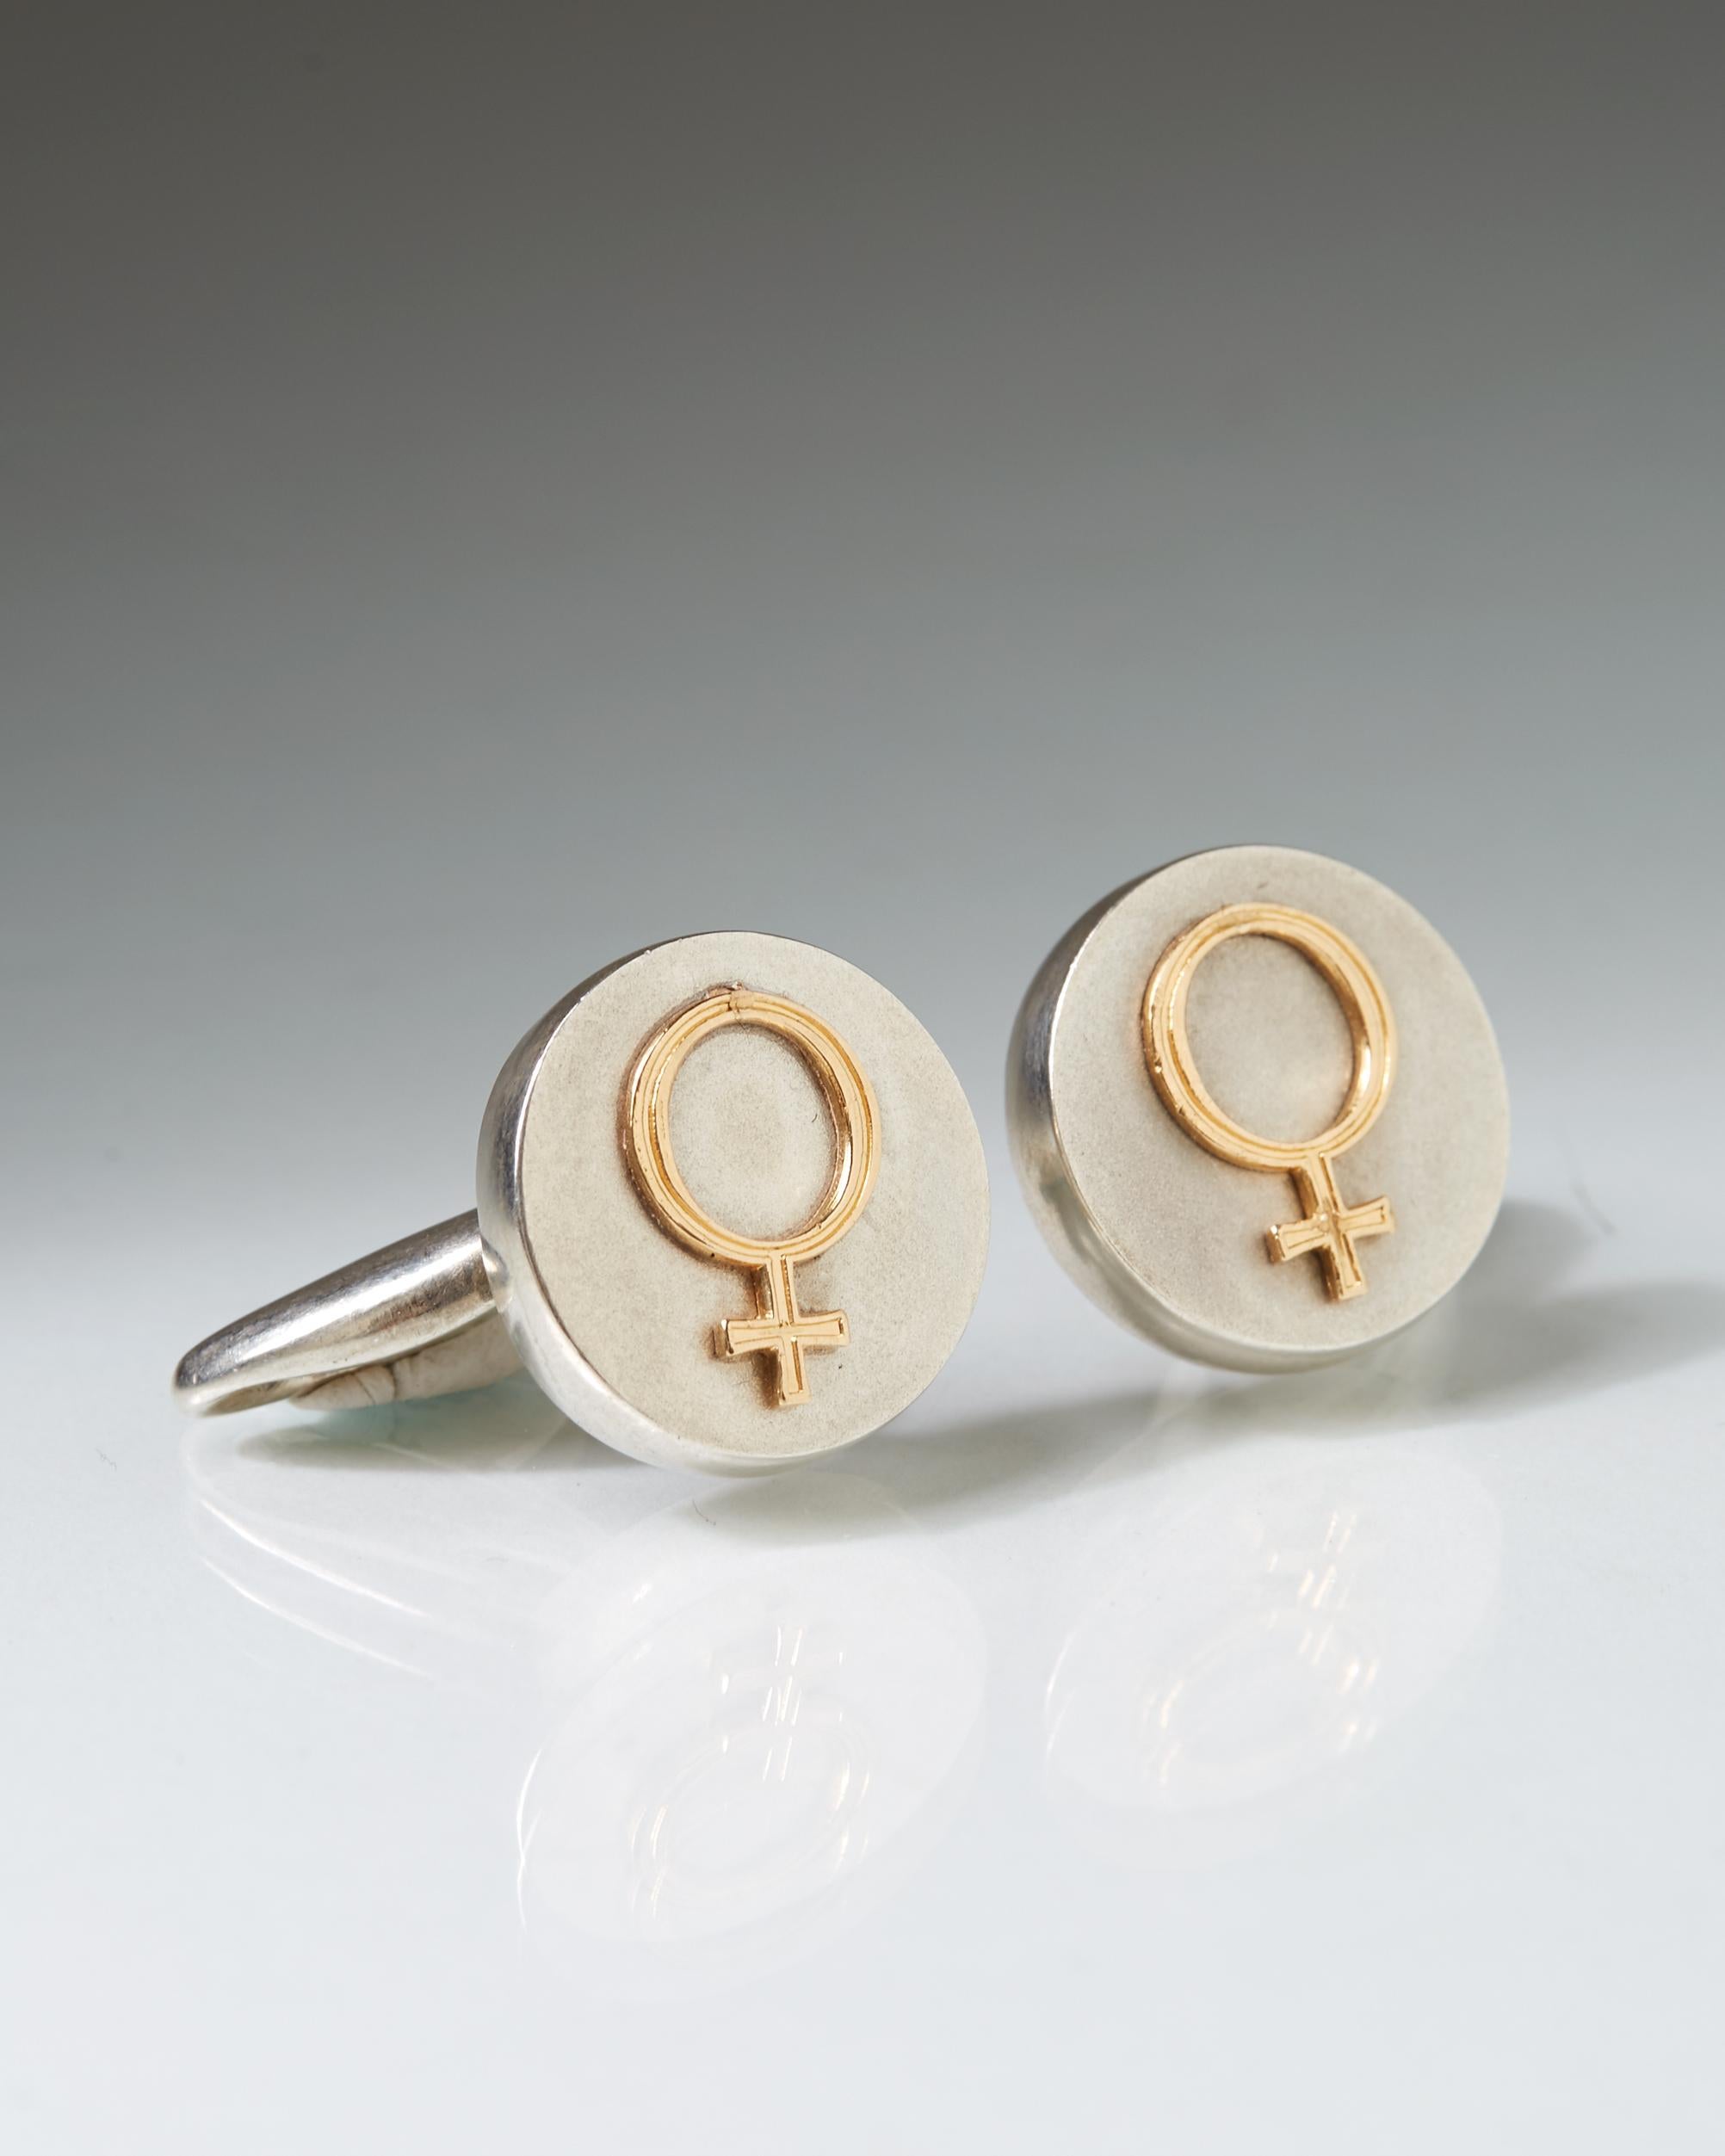 Sterling silver and 18 ct gold.

D: 2 cm/ 3/4''